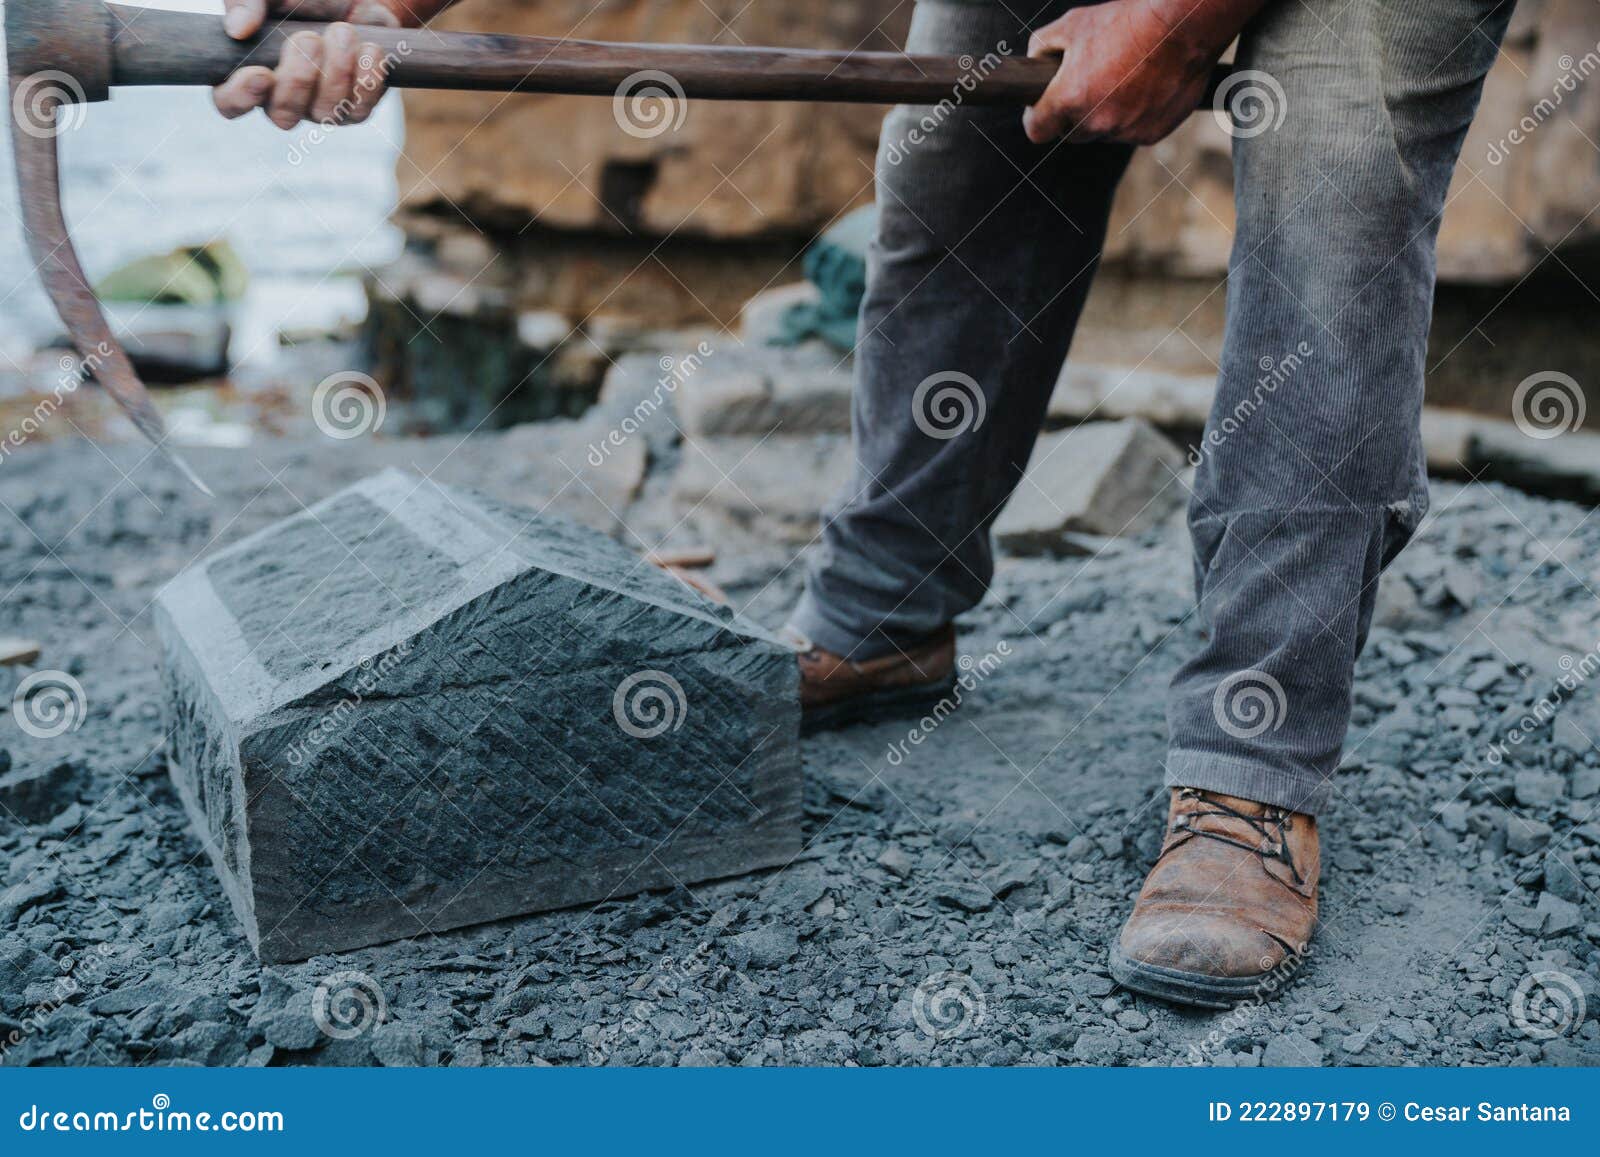 stone craftsman carefully chipping at a block of cancagua stone to  it